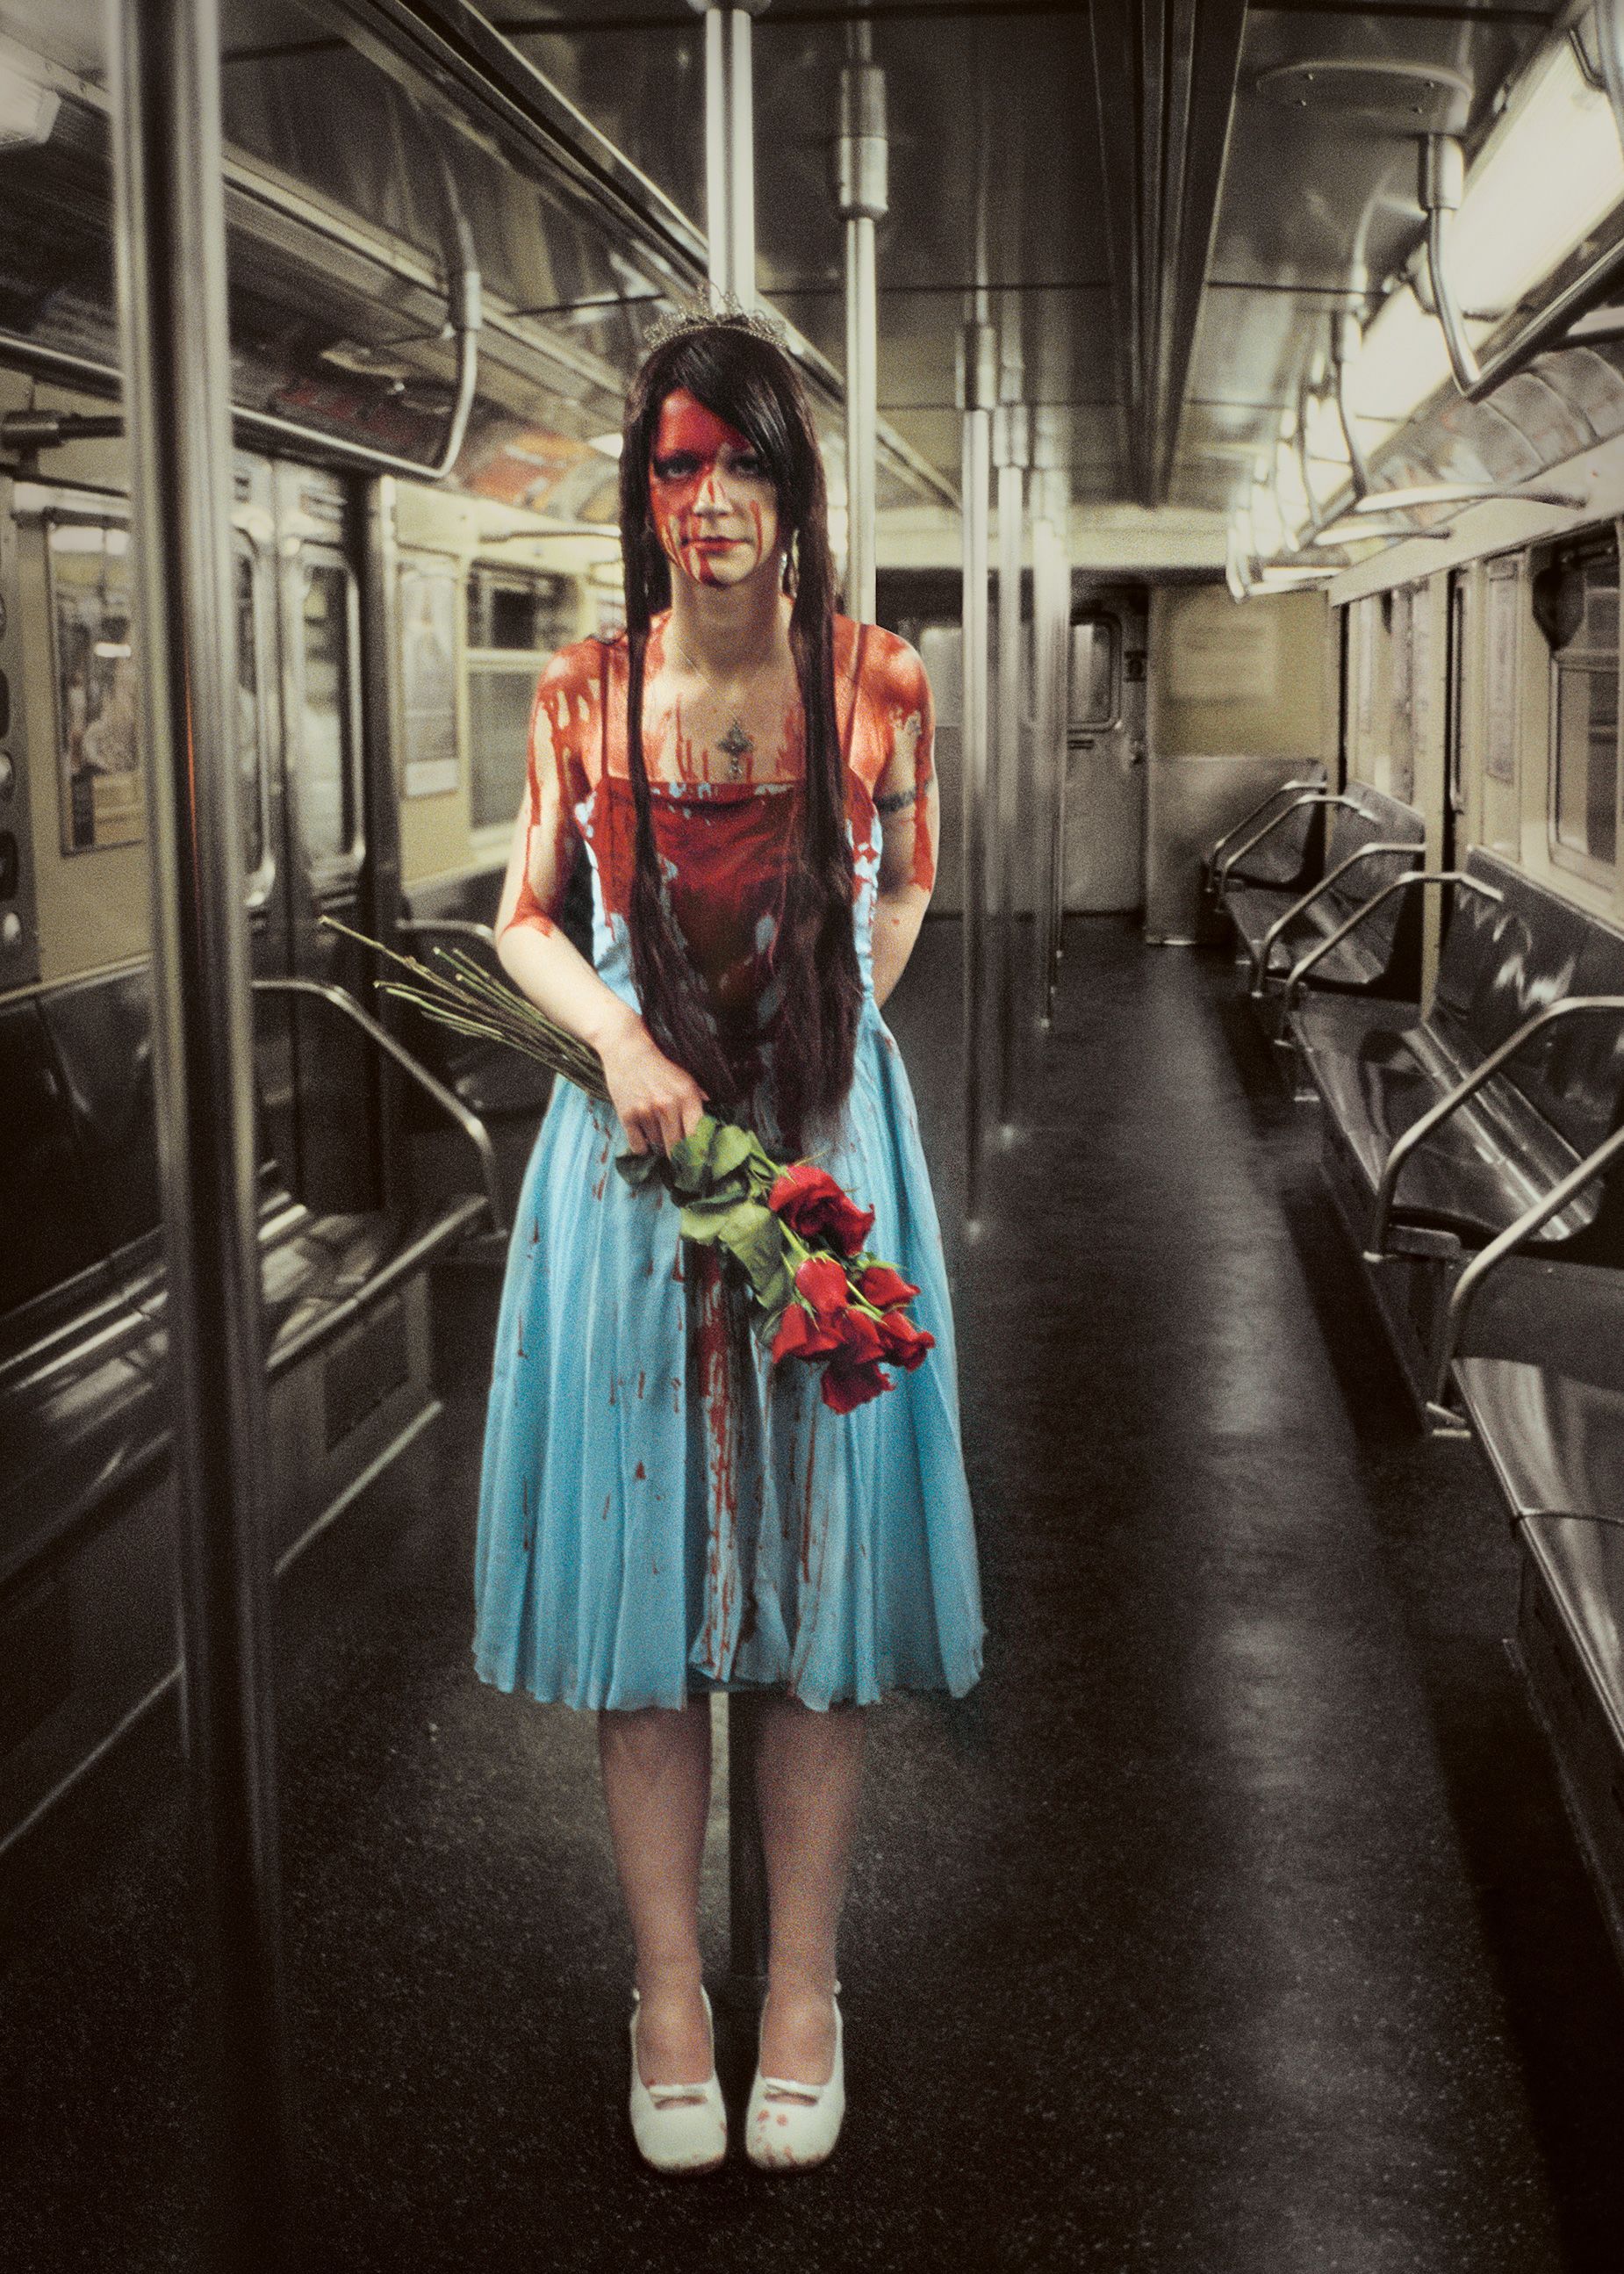 While a bloodied prom queen lurks on an empty train carriage.